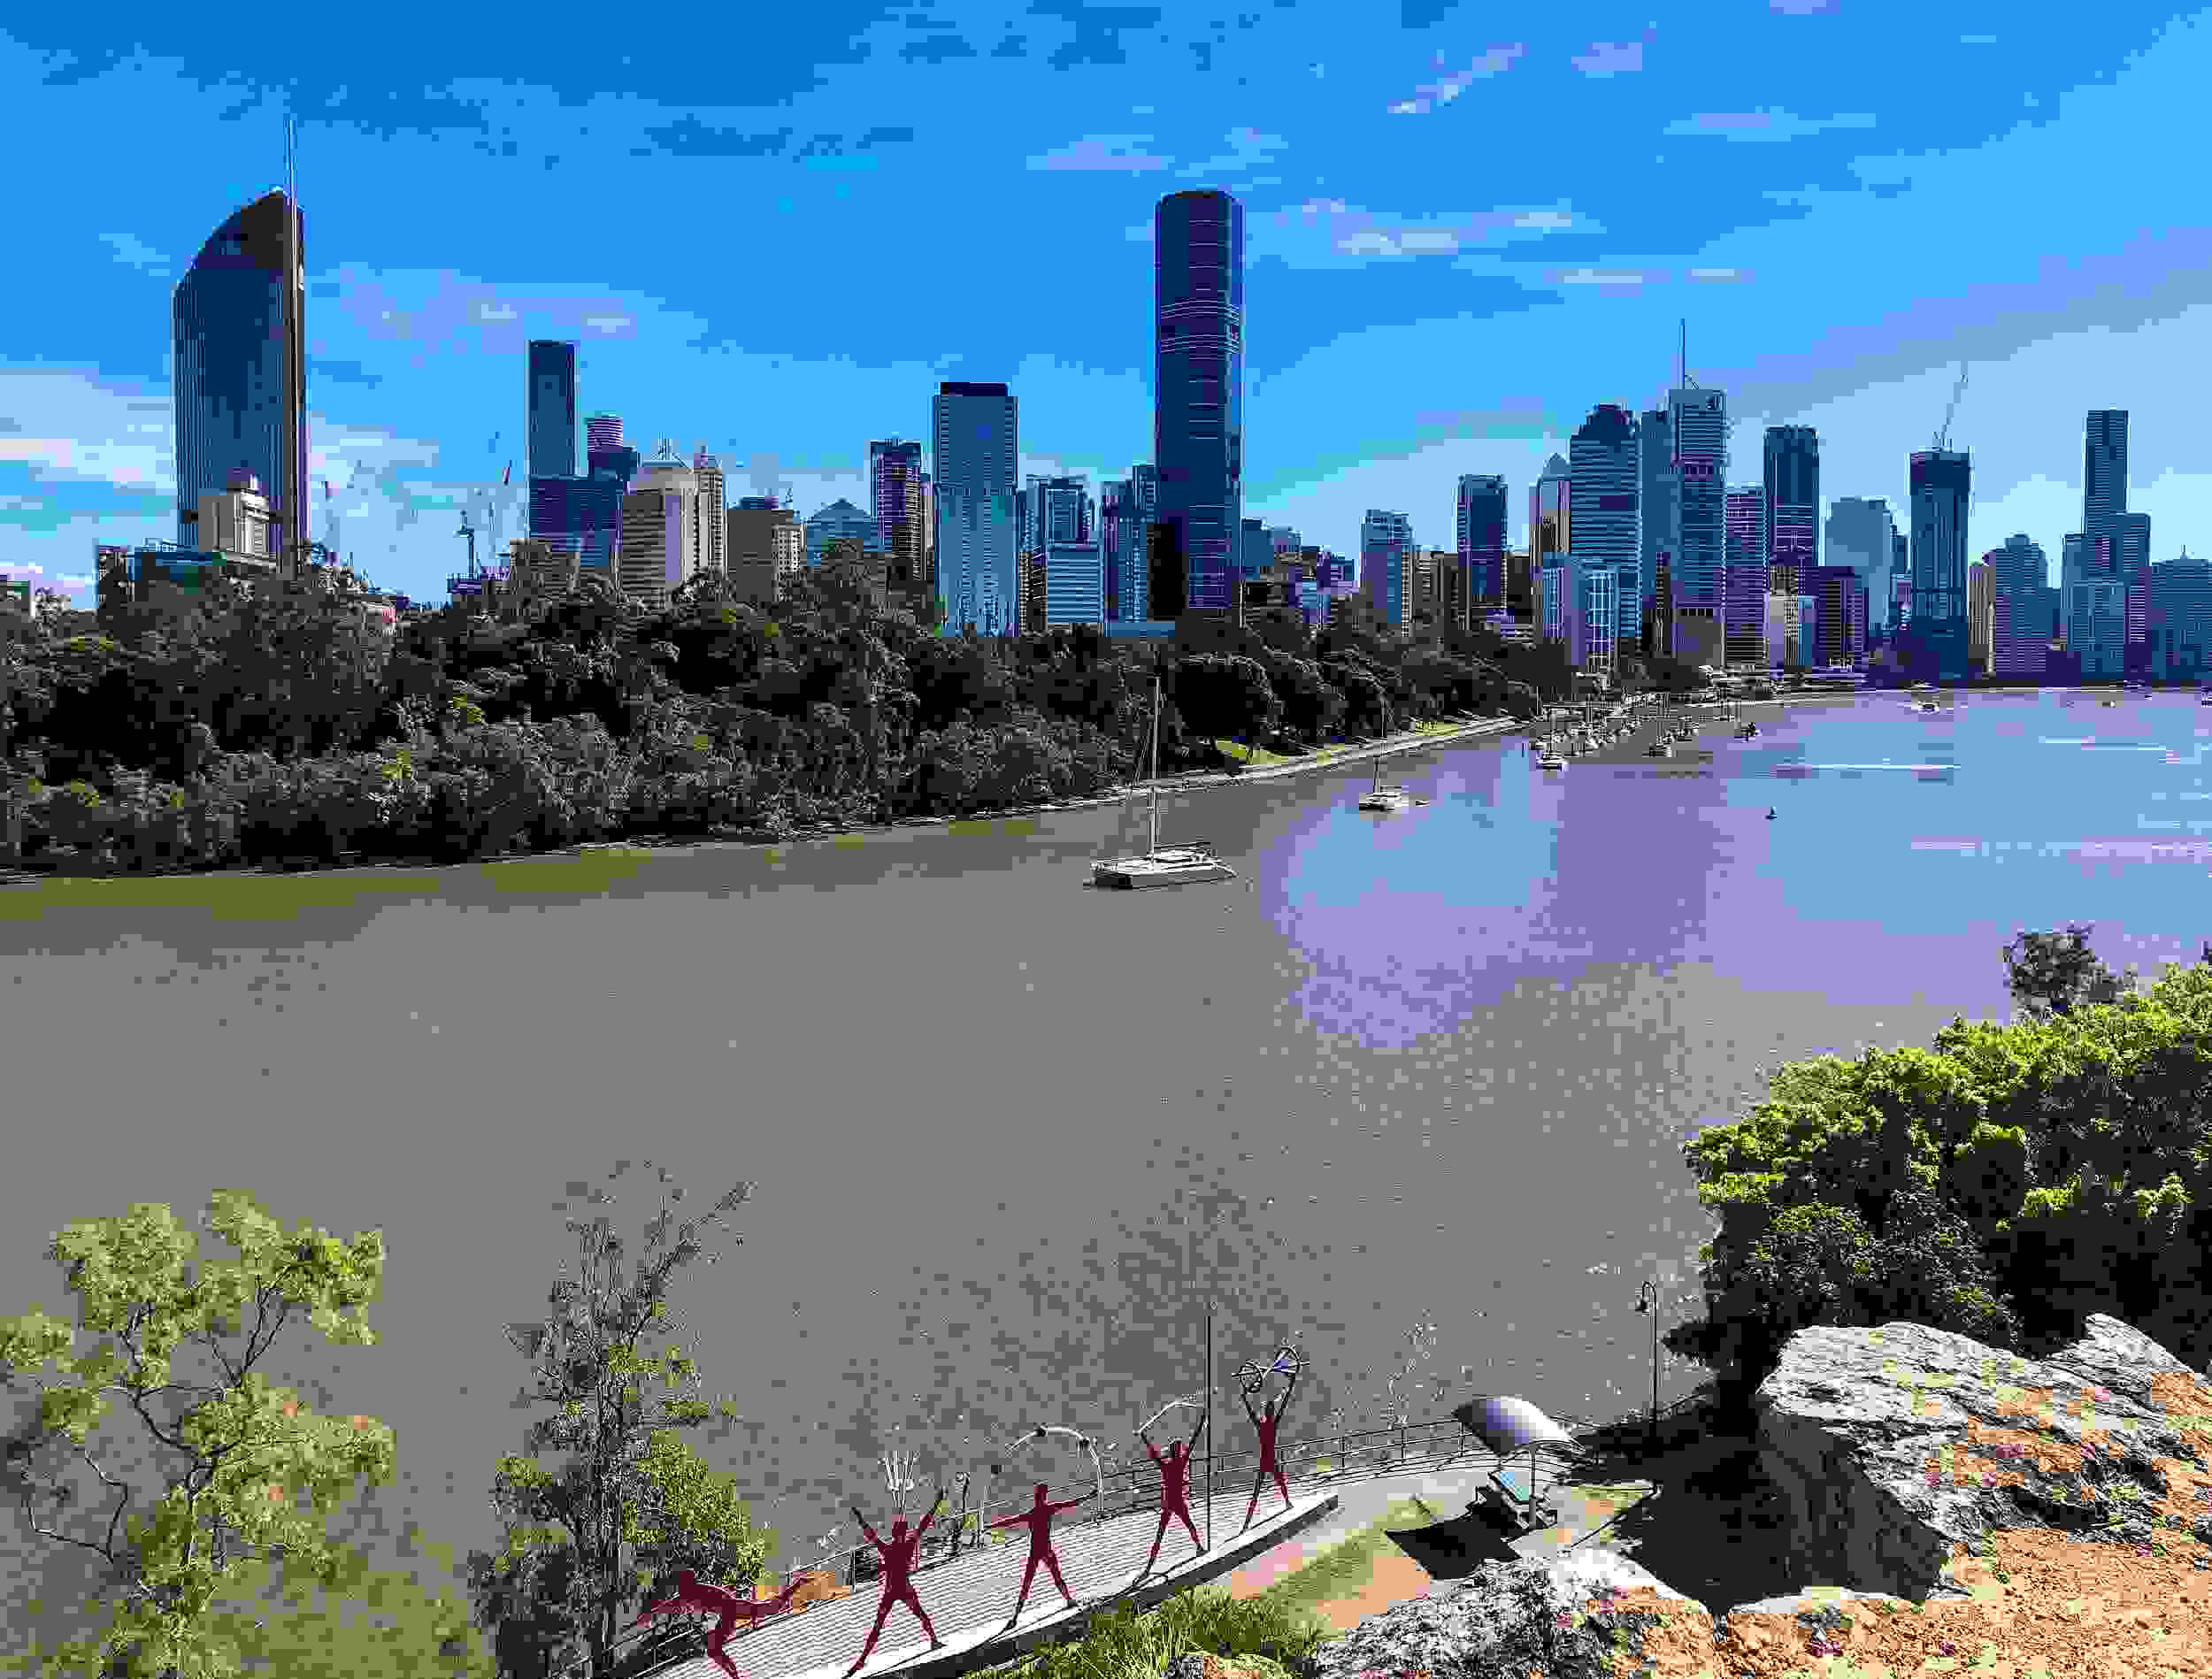 Guided tour of Brisbane, Australia from South Bank Parklands to New Farm